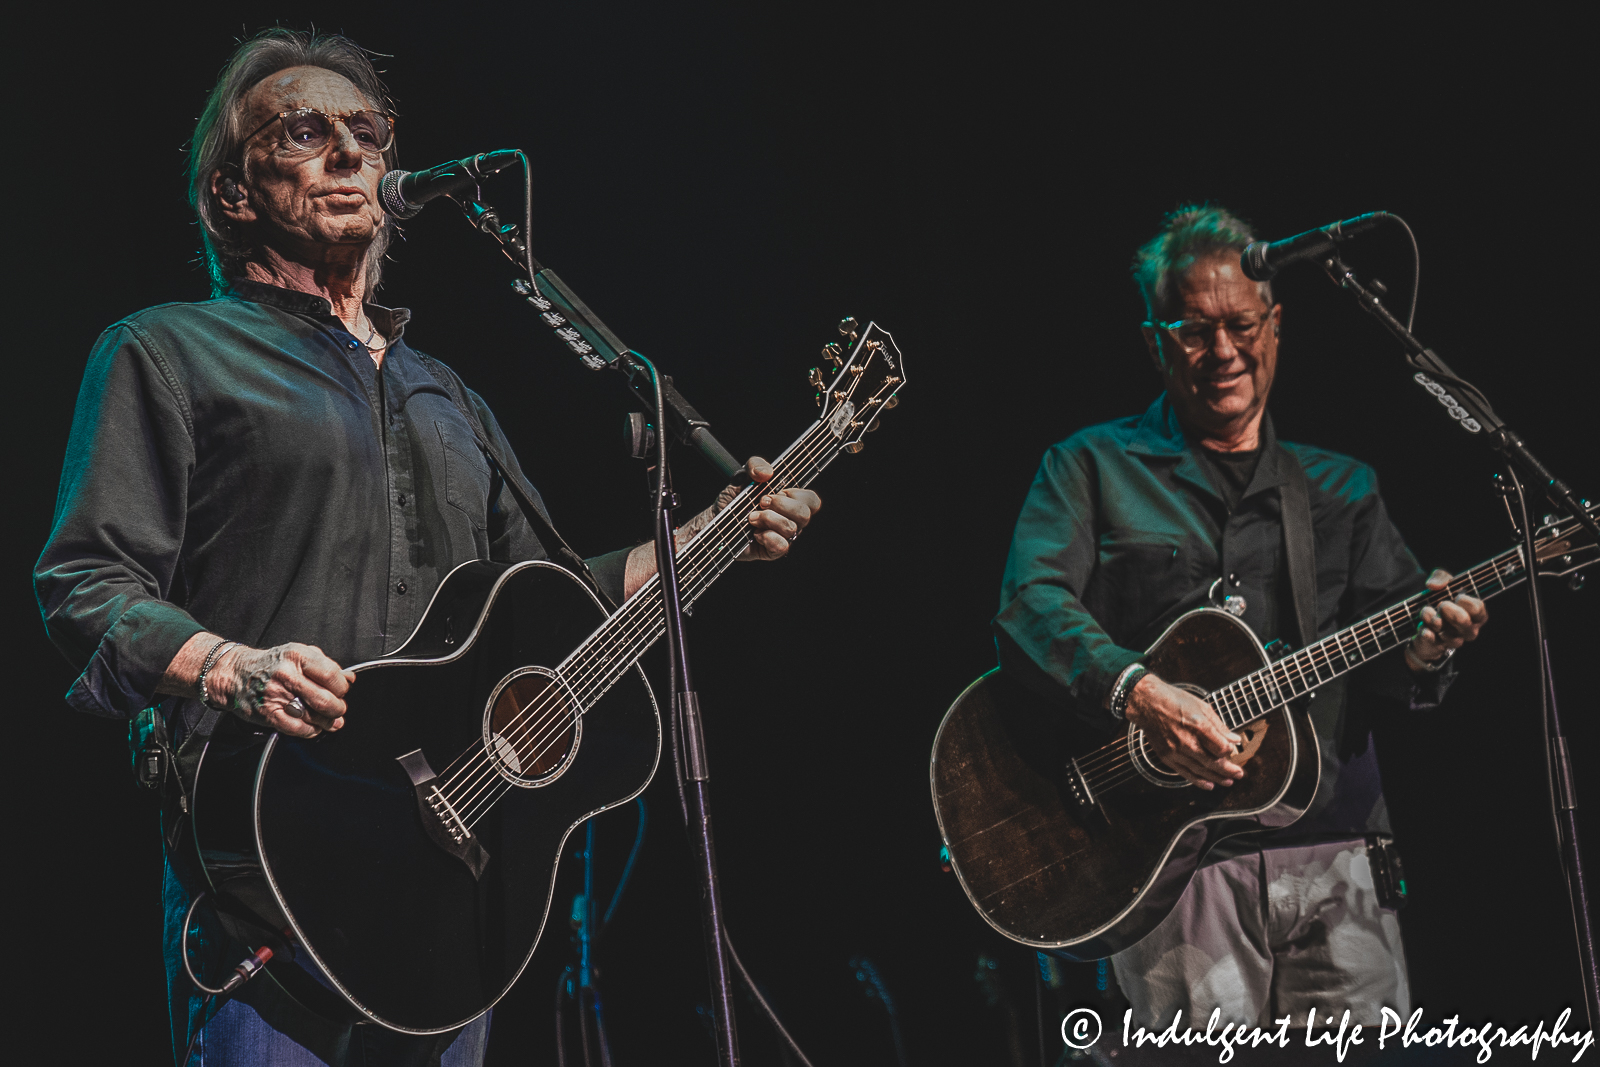 Dewey Bunnell and Gerry Beckley of folk rock band America performing live together at Ameristar Casino in Kansas City, MO on June 2, 2023.